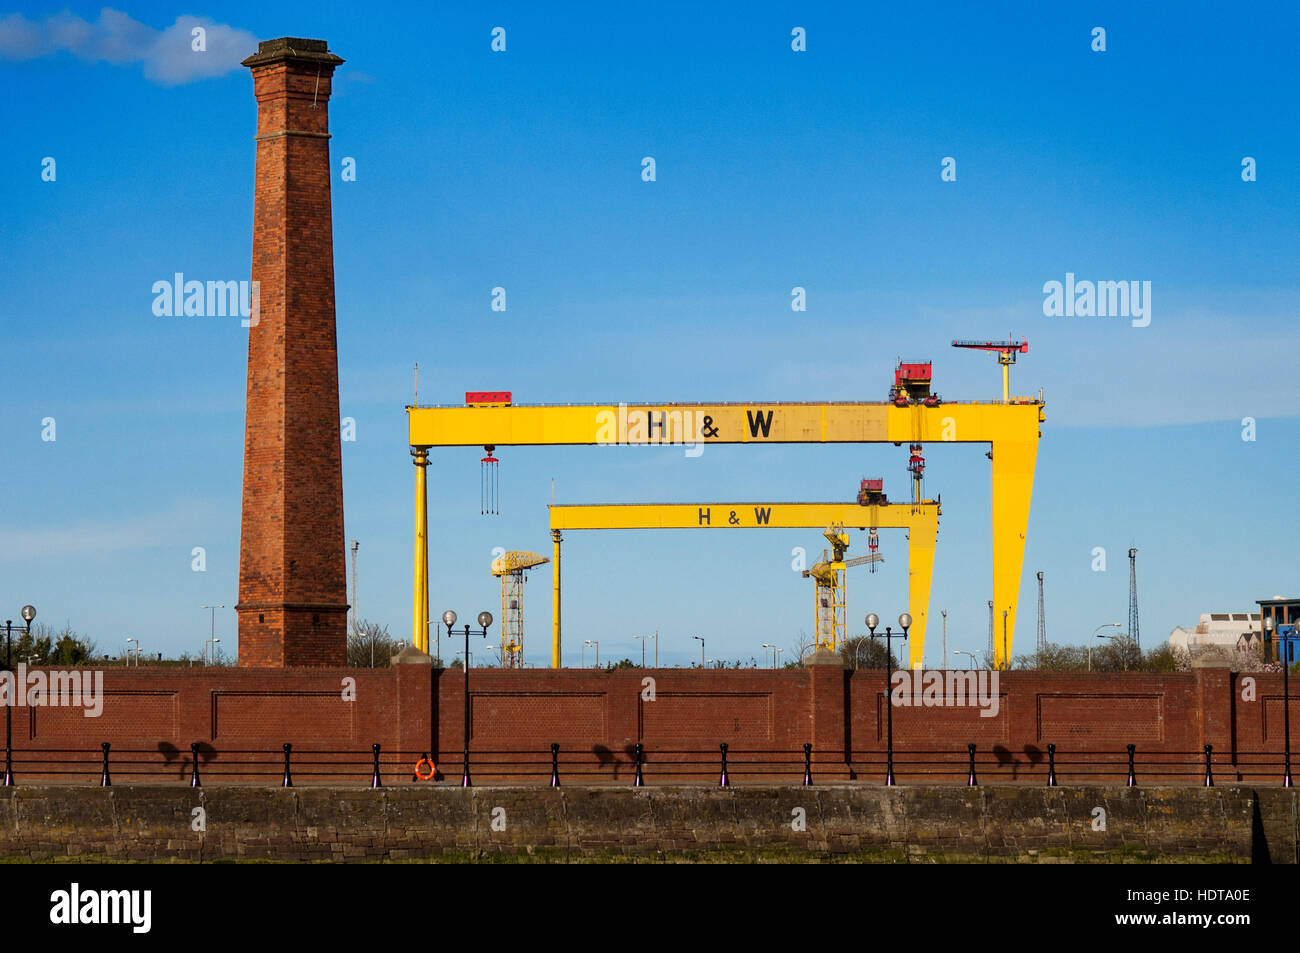 Sampson and Goliath, the famous landmarks of Harland and Wolff shipyard, Belfast, Northern Ireland, UK.  The Samson and Goliath gantry cranes have bec Stock Photo